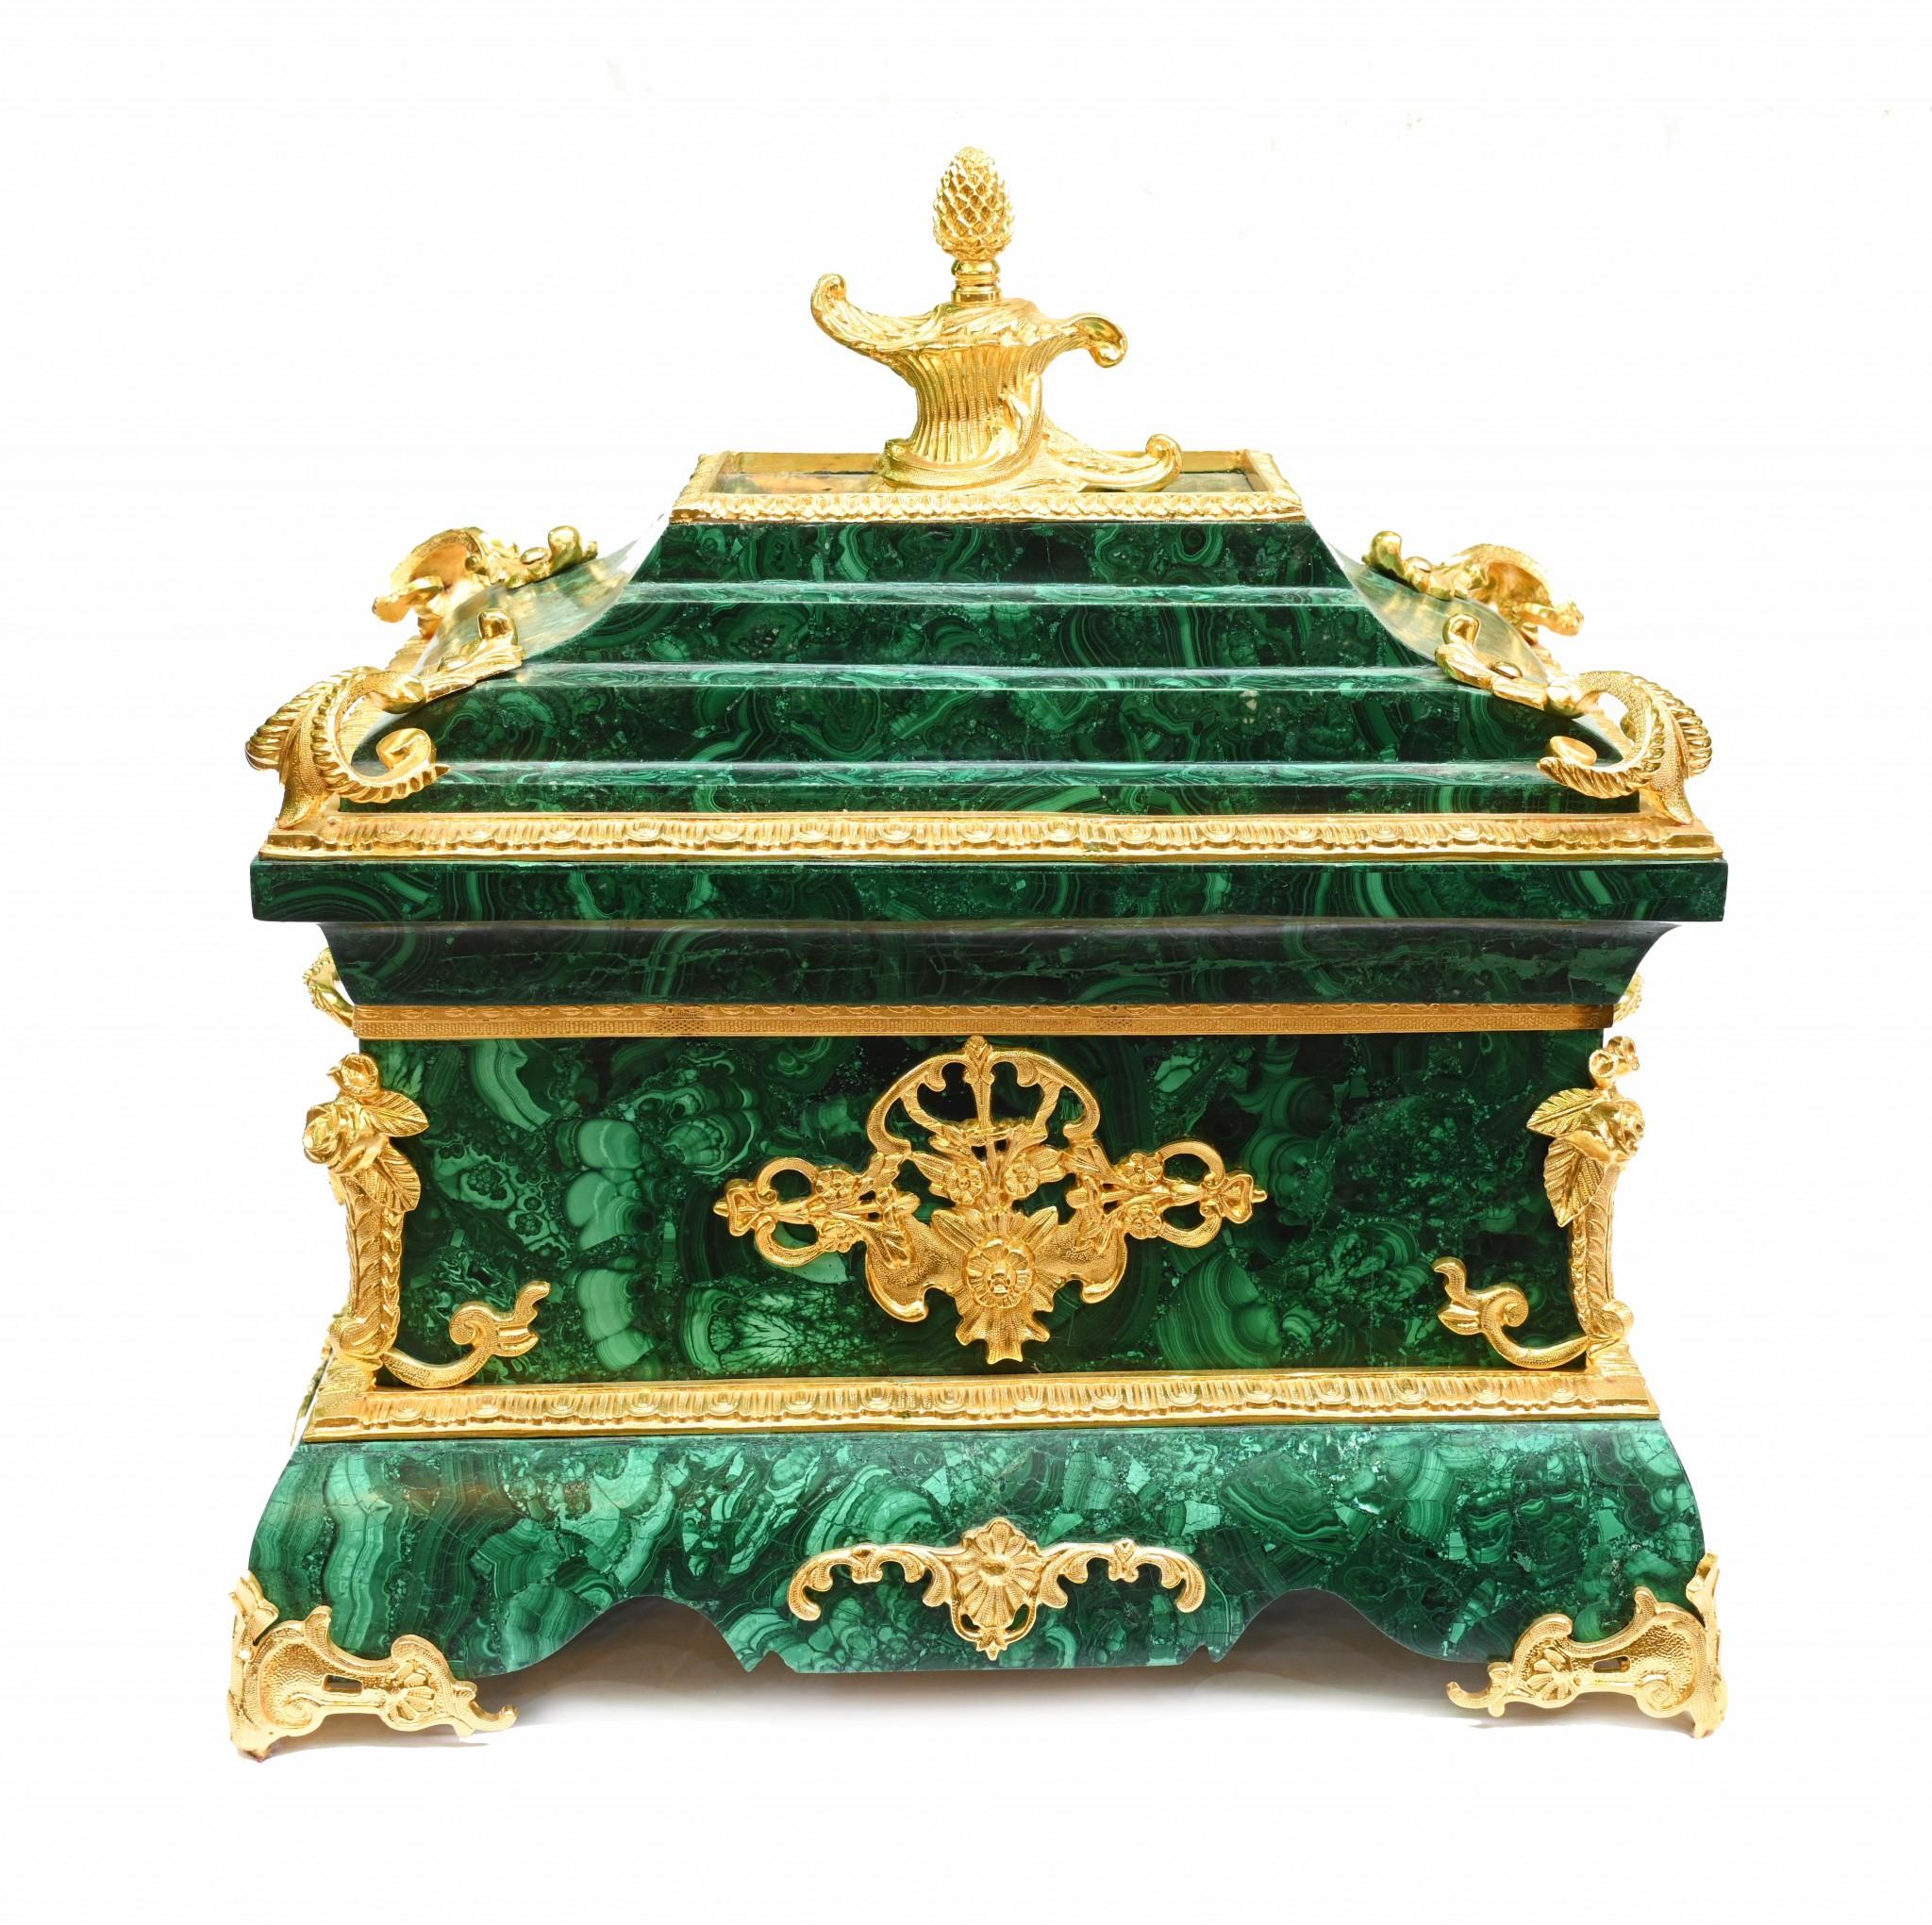 Stunning malachite and ormolu marriage casket or box
Such a dazzling interplay of colours between the malachite and the gilt / ormolu fixtures
Great decorative piece and ample storage inside
Circa 1950
The gilt fixtures are very intricately cast